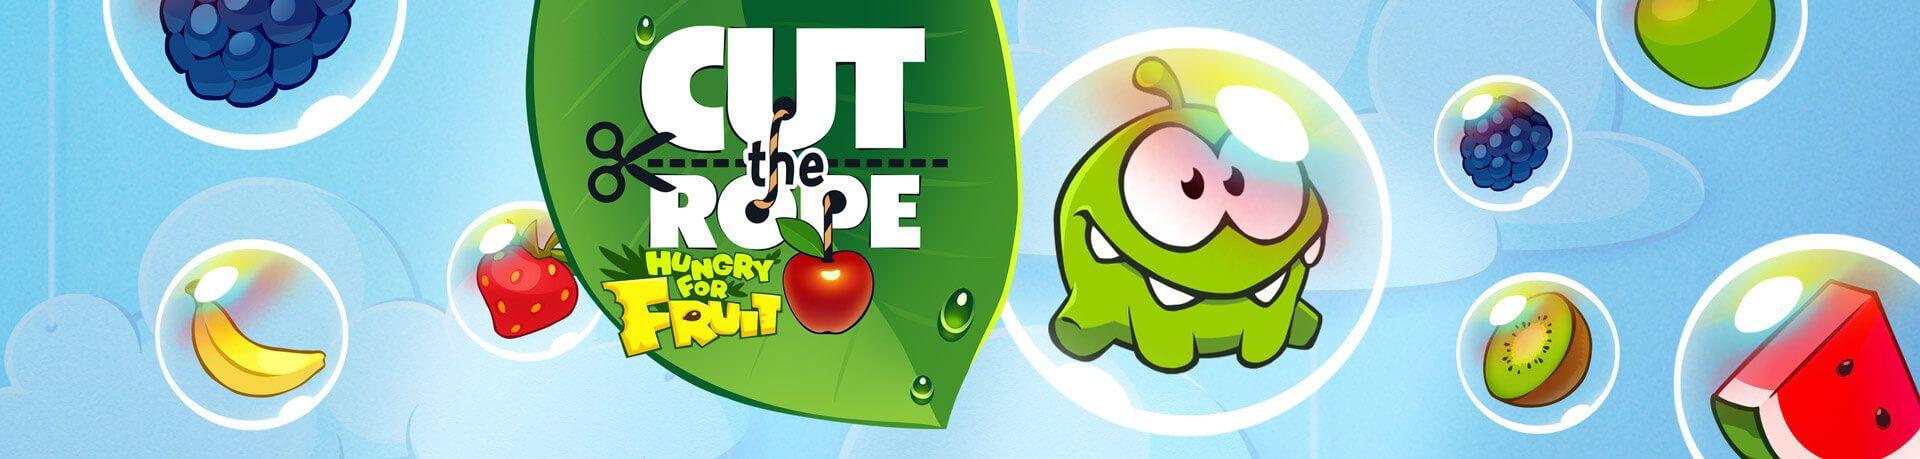 Cut the Rope Logo - Cut the Rope - Fuel